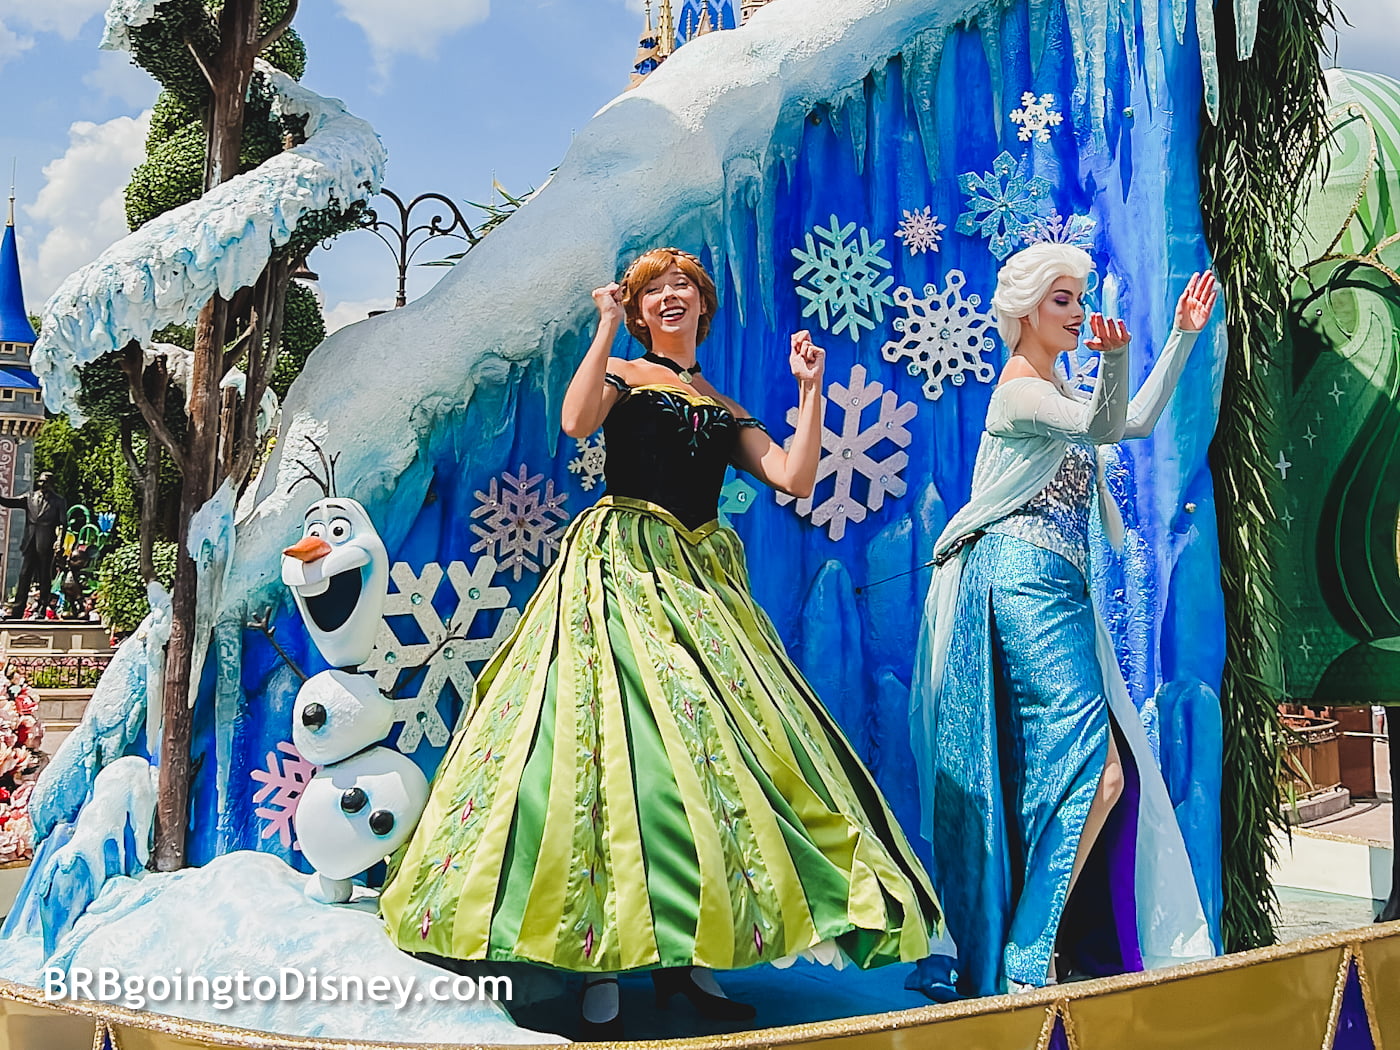 Where to Find the Disney Princesses at Disney World